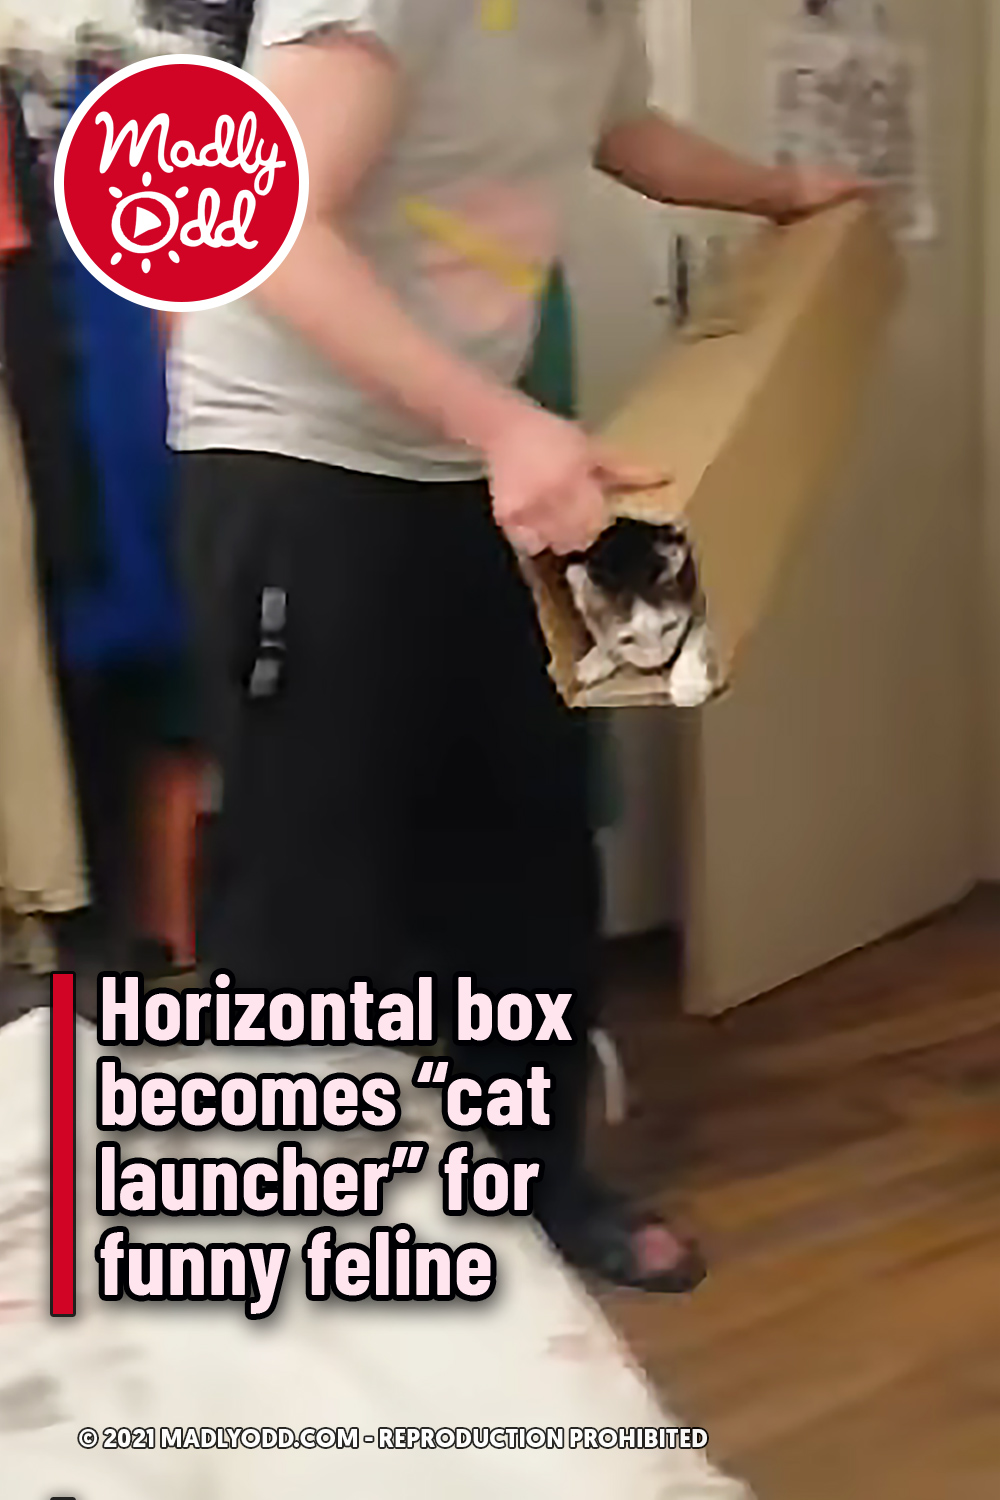 Horizontal box becomes “cat launcher” for funny feline